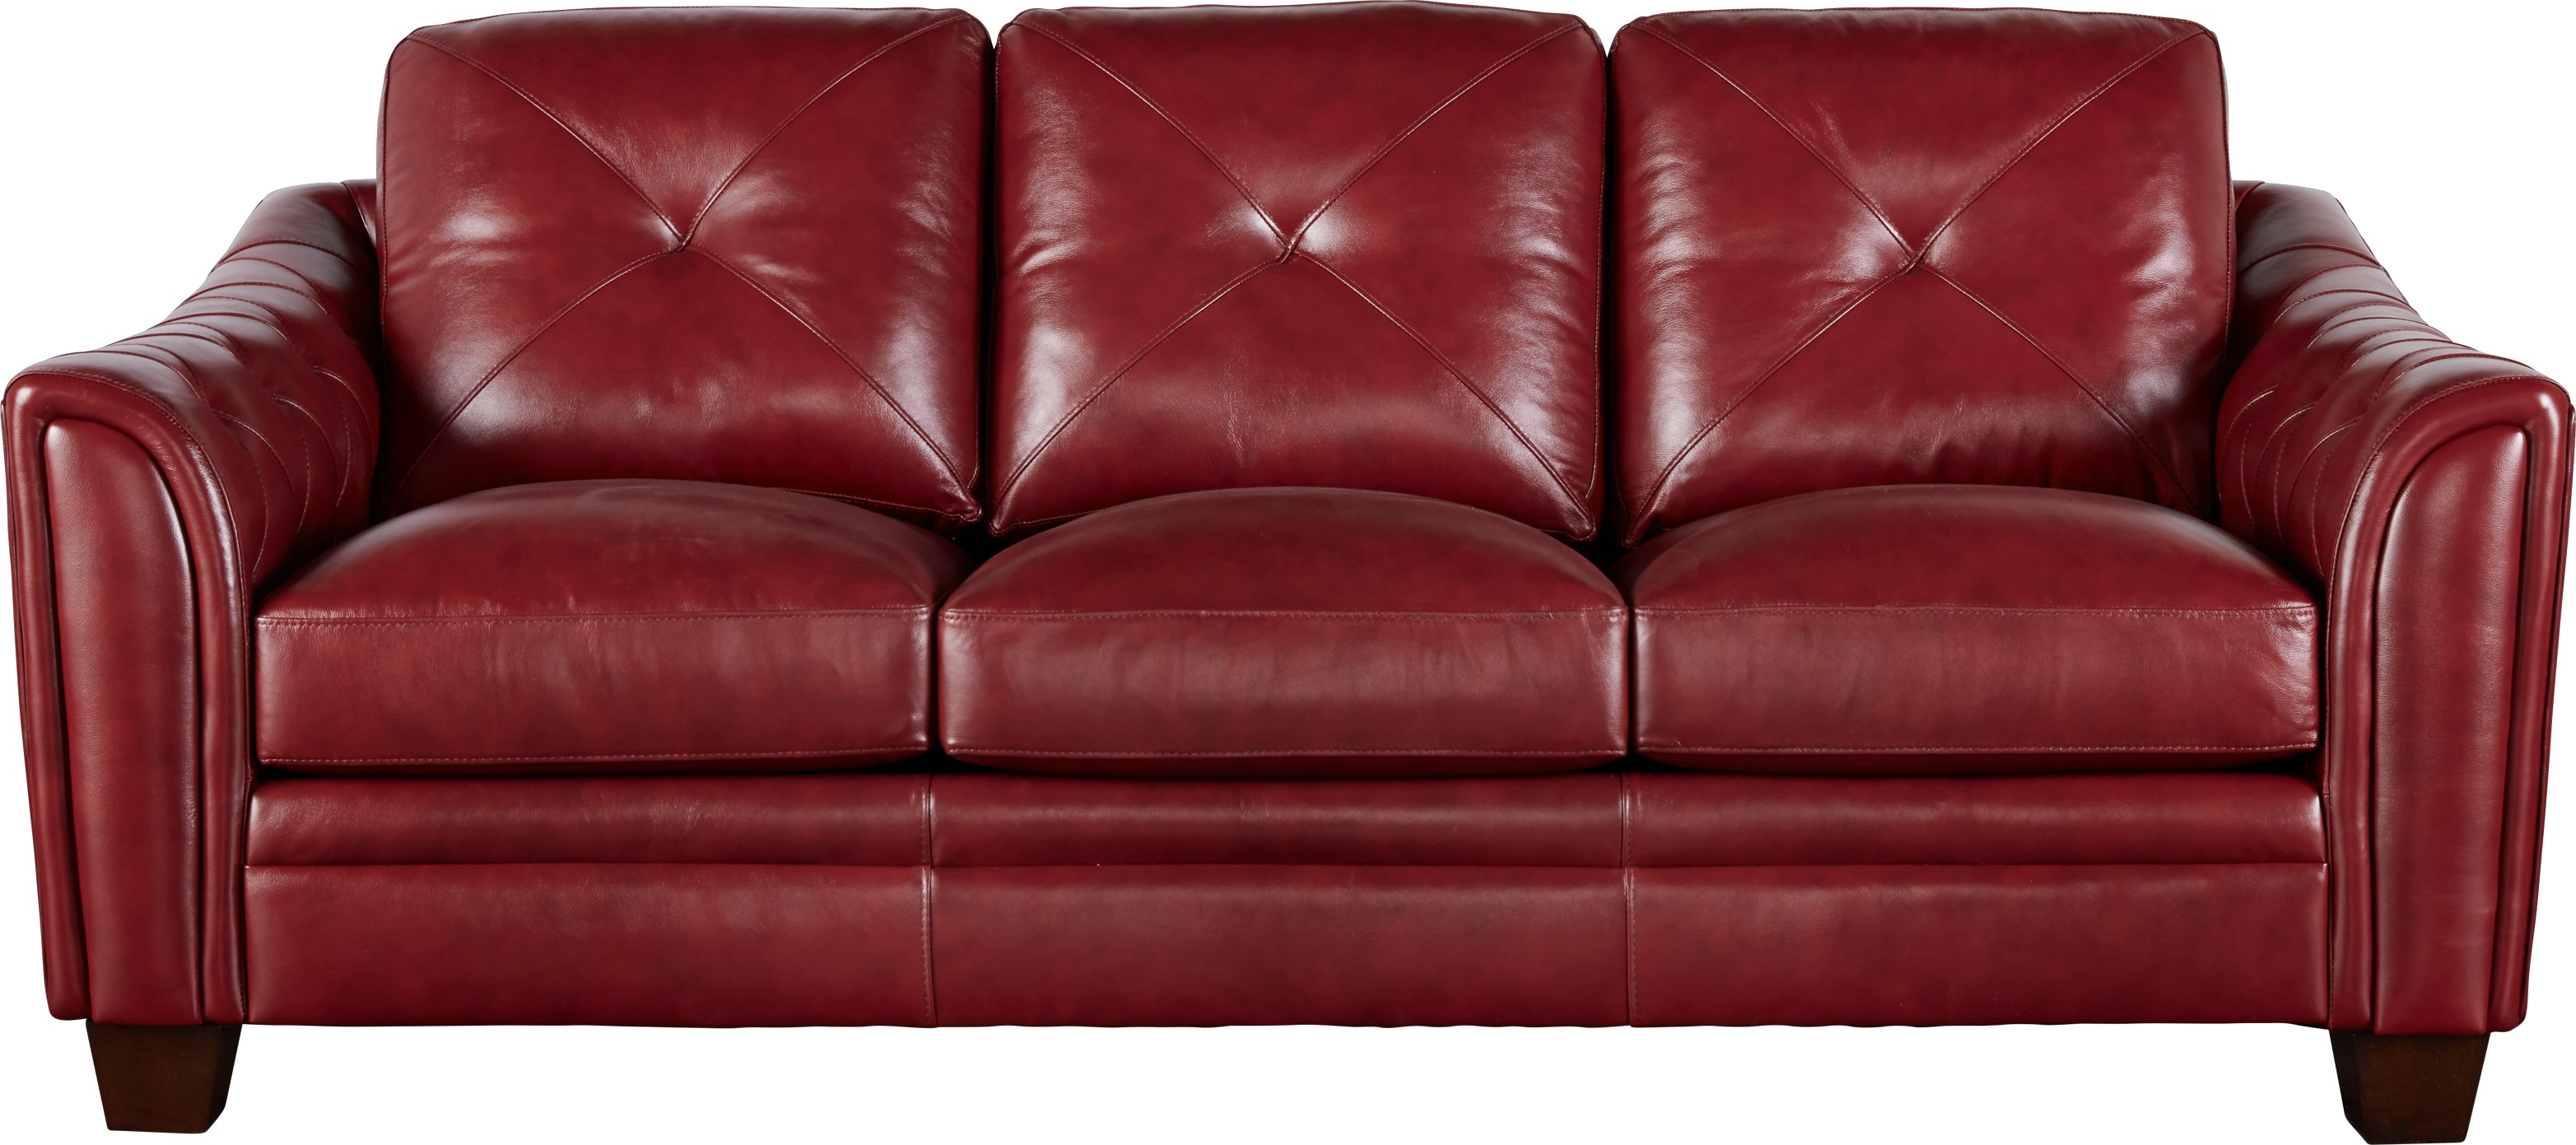 red leather sofa sets on sale